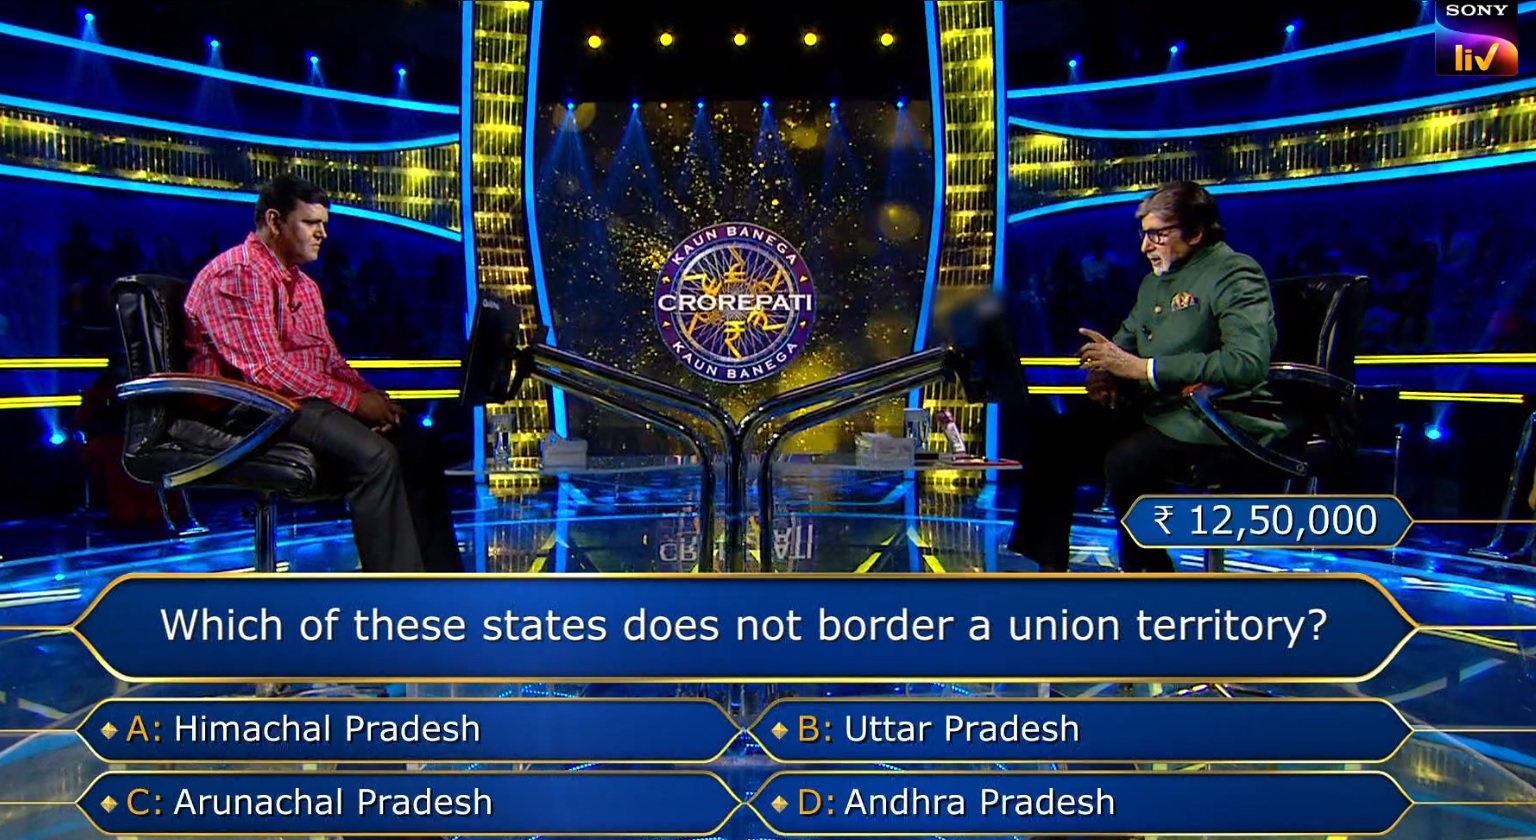 Ques : Which of these states does not border a union territory?